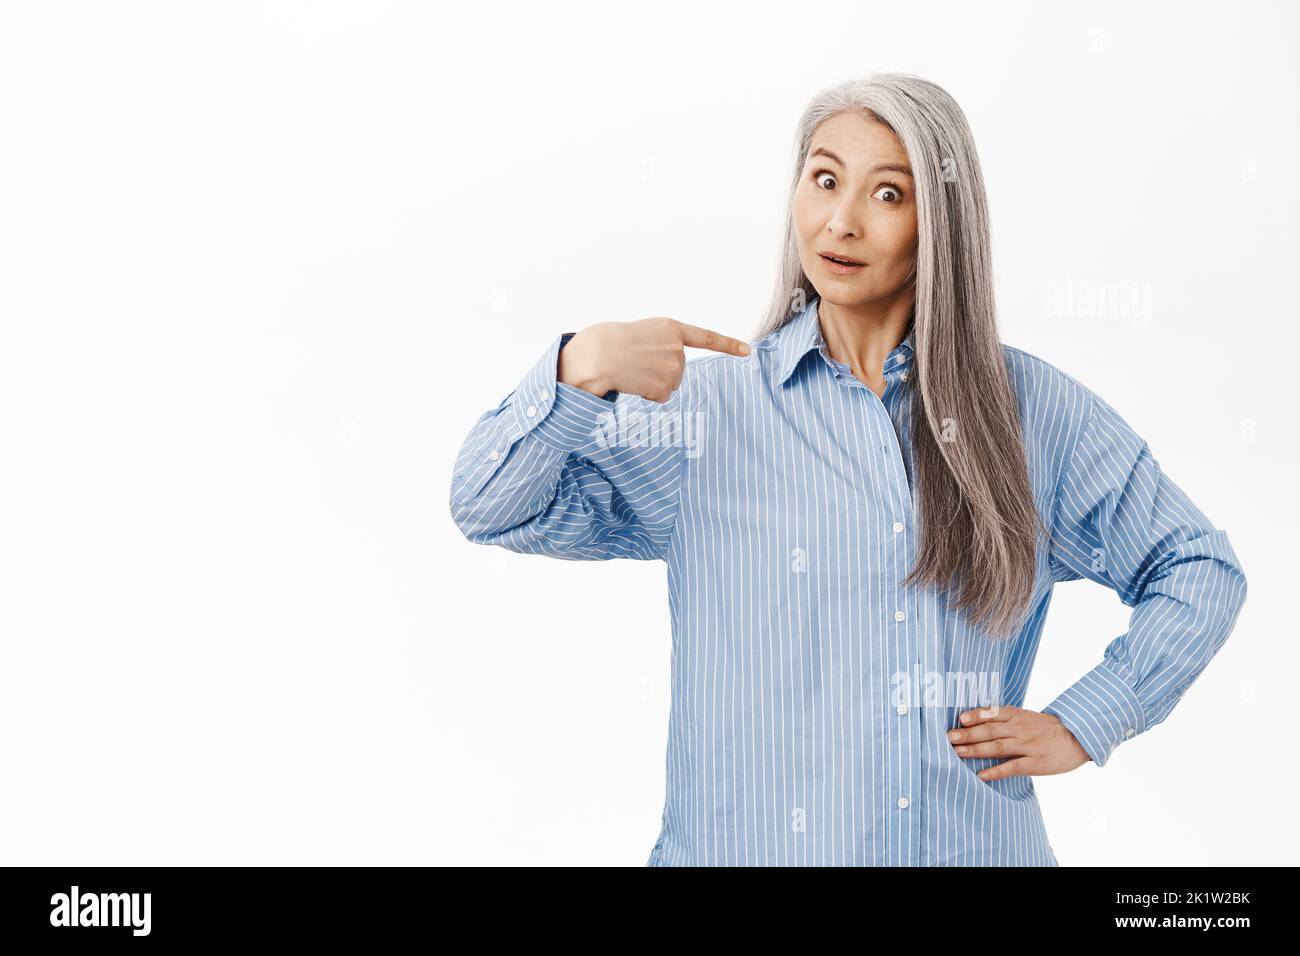 Surprised old asian lady, mother with gray hair, pointing at herself with disbelief, standing over white studio background Stock Photo